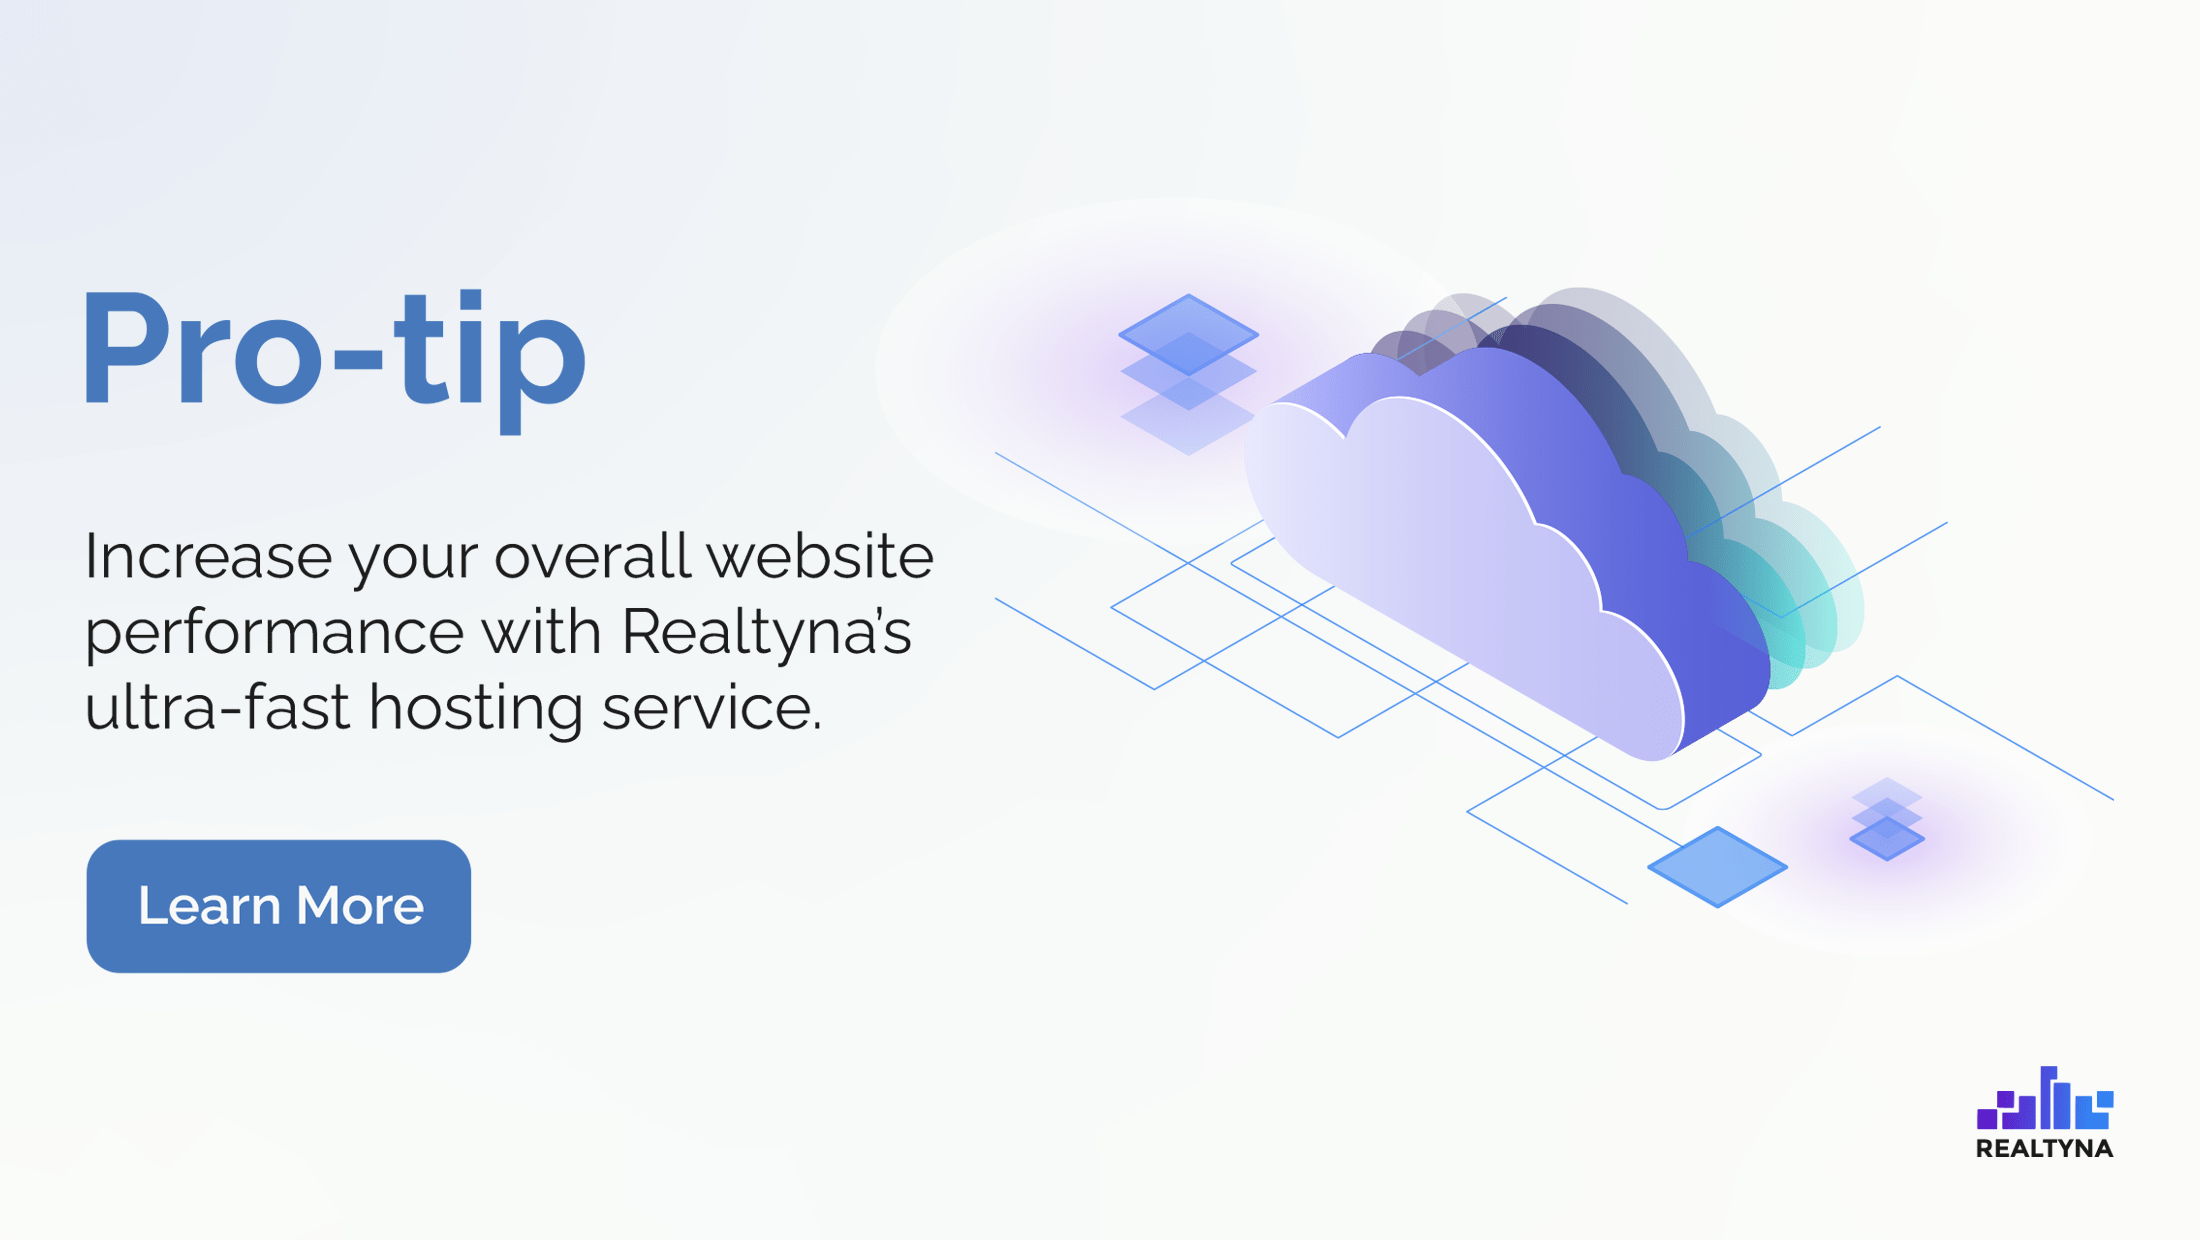 Realtyna’s ultra-fast hosting service